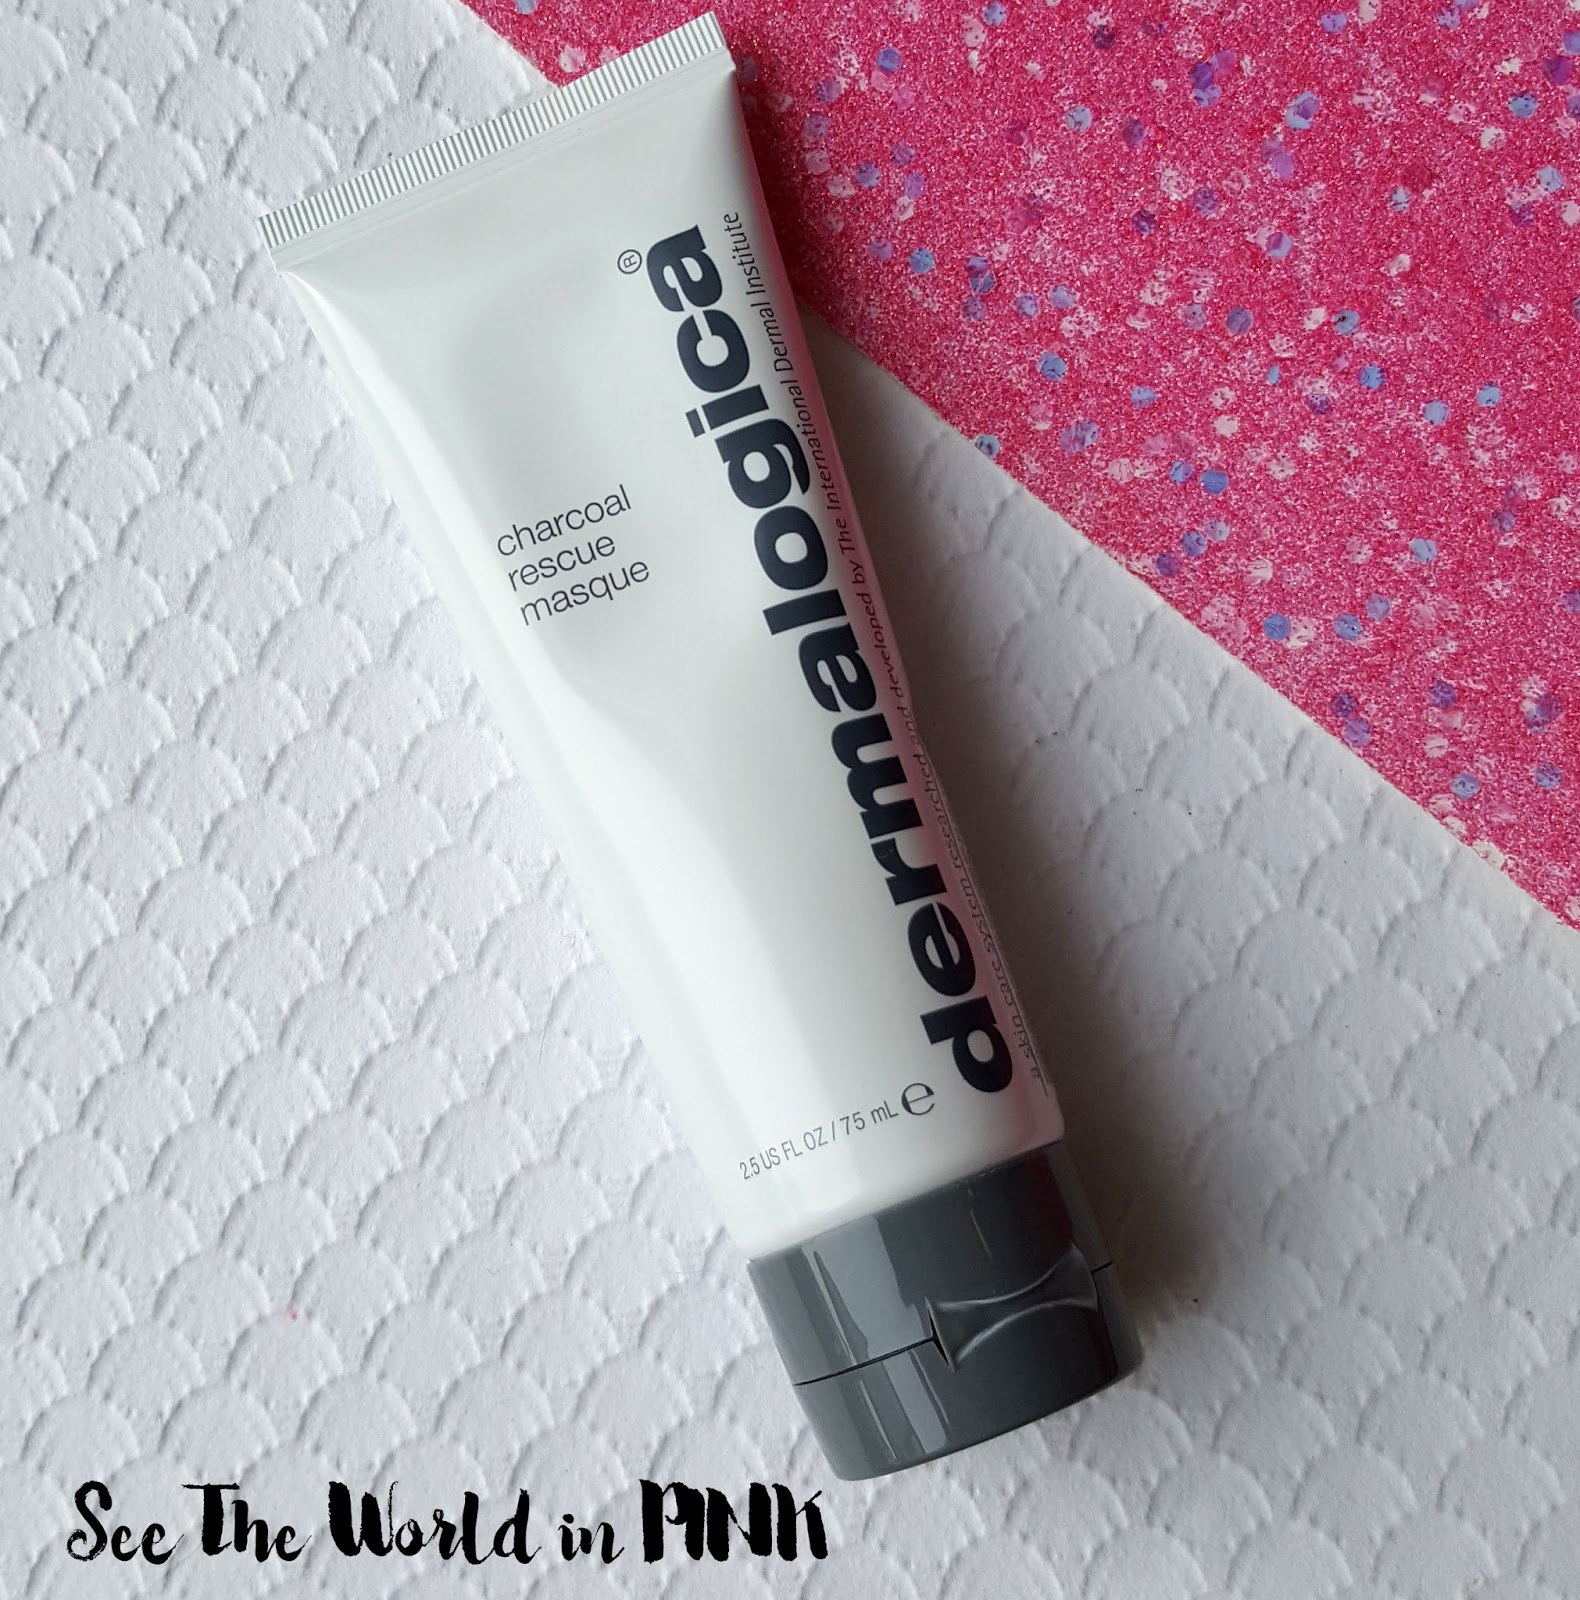 Skincare Sunday - Dermalogica Charcoal Rescue Masque Review! 